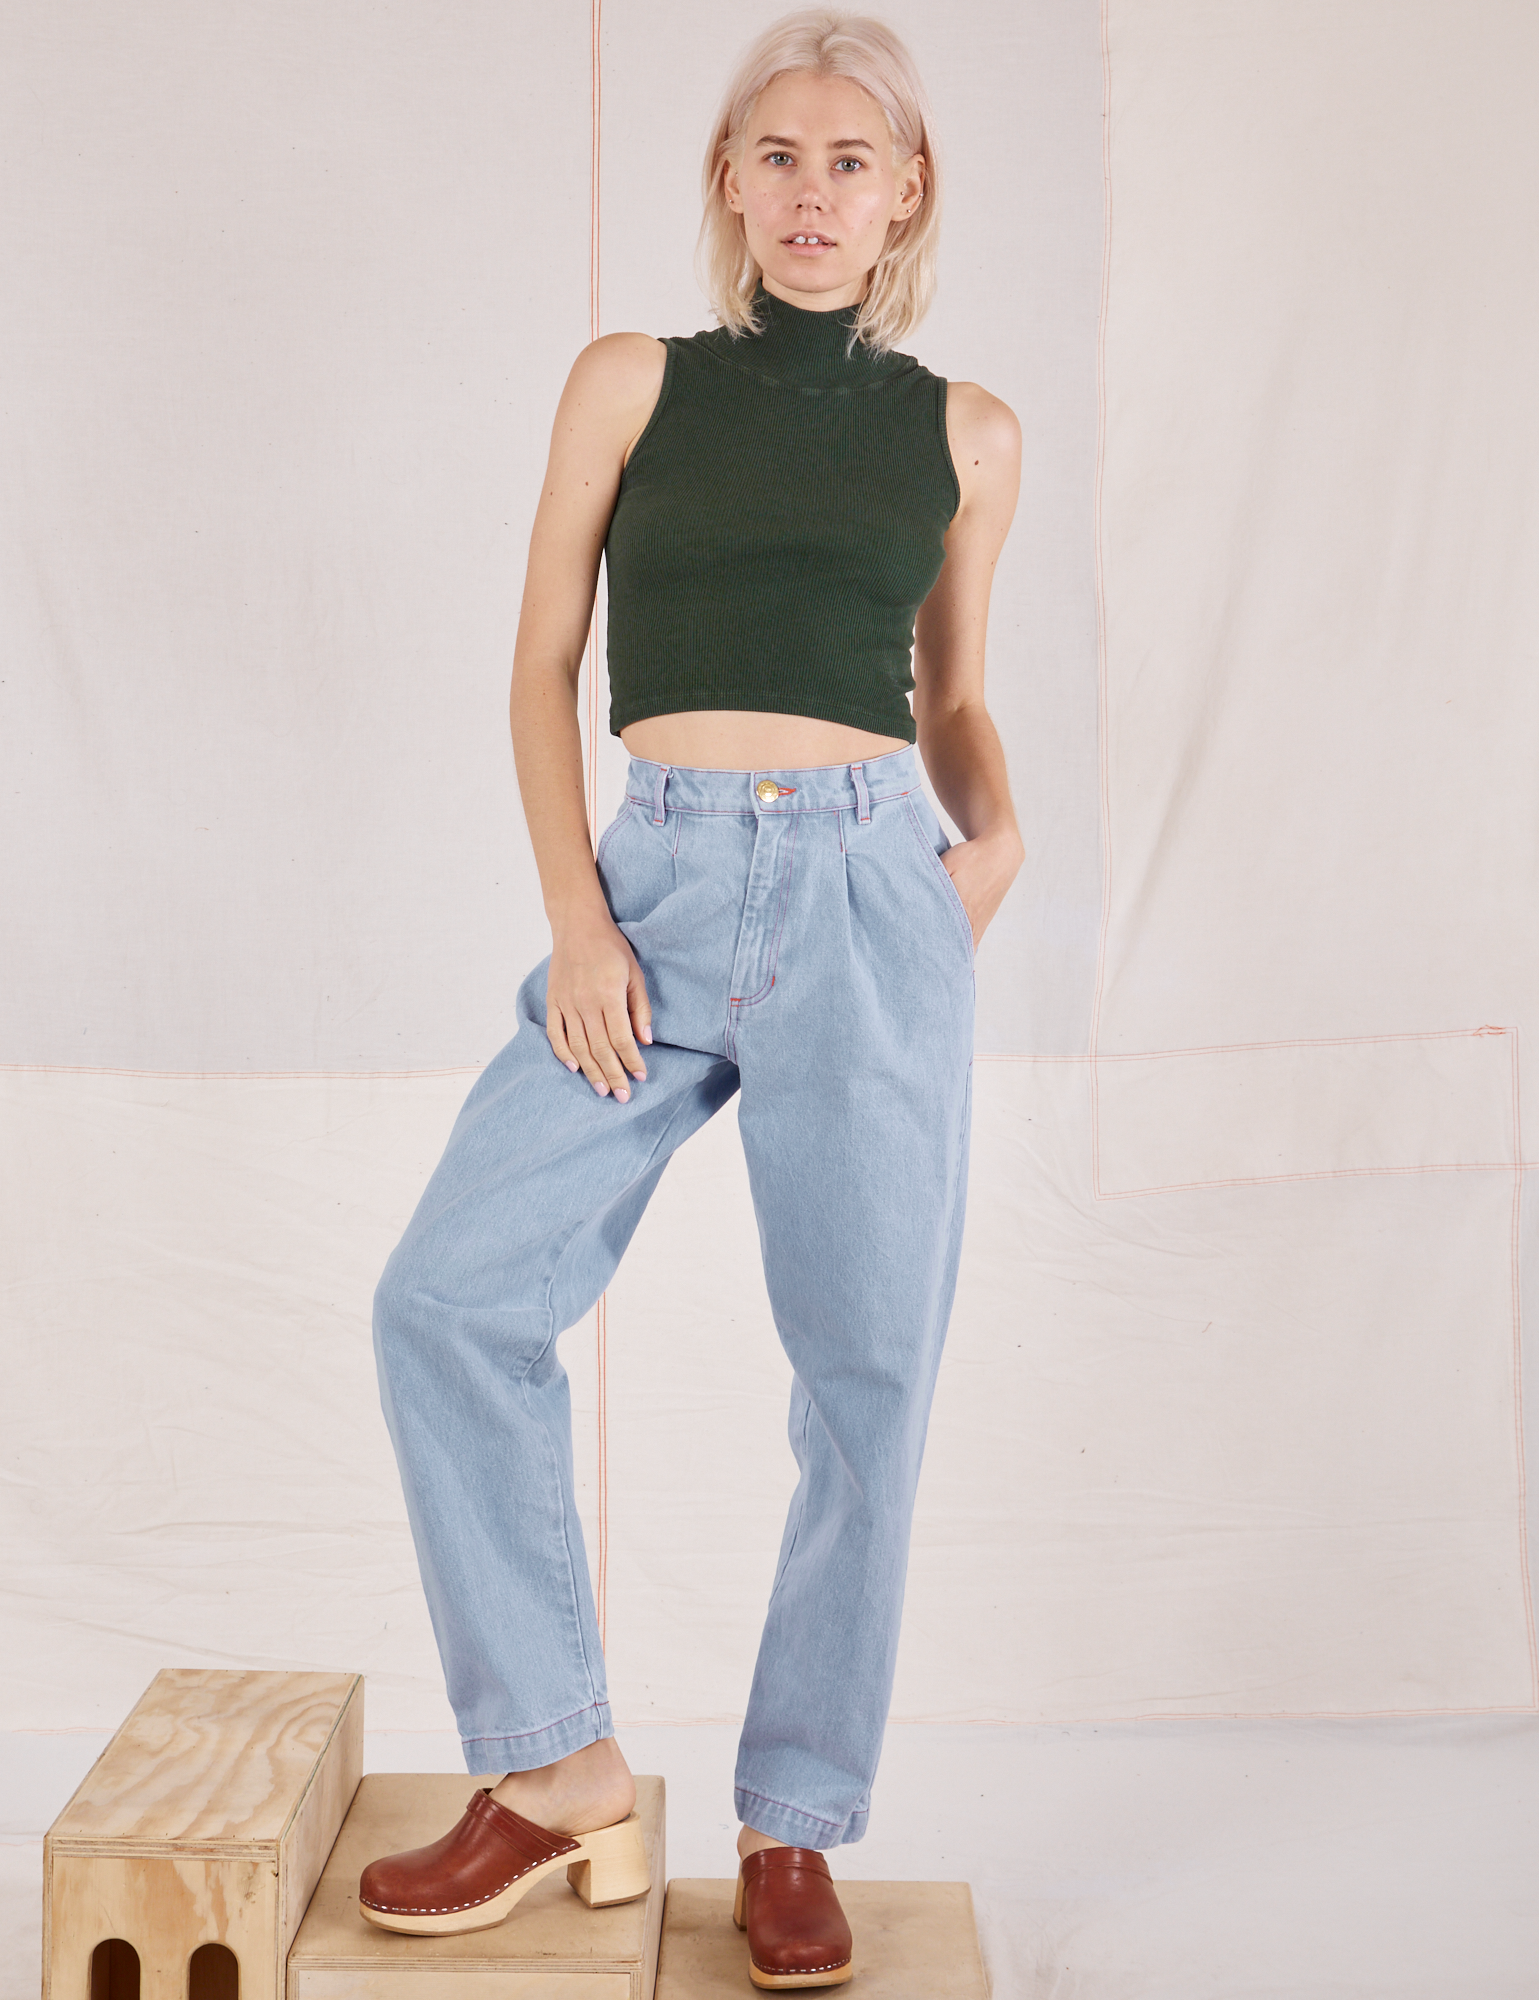 Madeline is wearing Sleeveless Essential Turtleneck in Swamp Green and light wash Denim Trouser Jeans